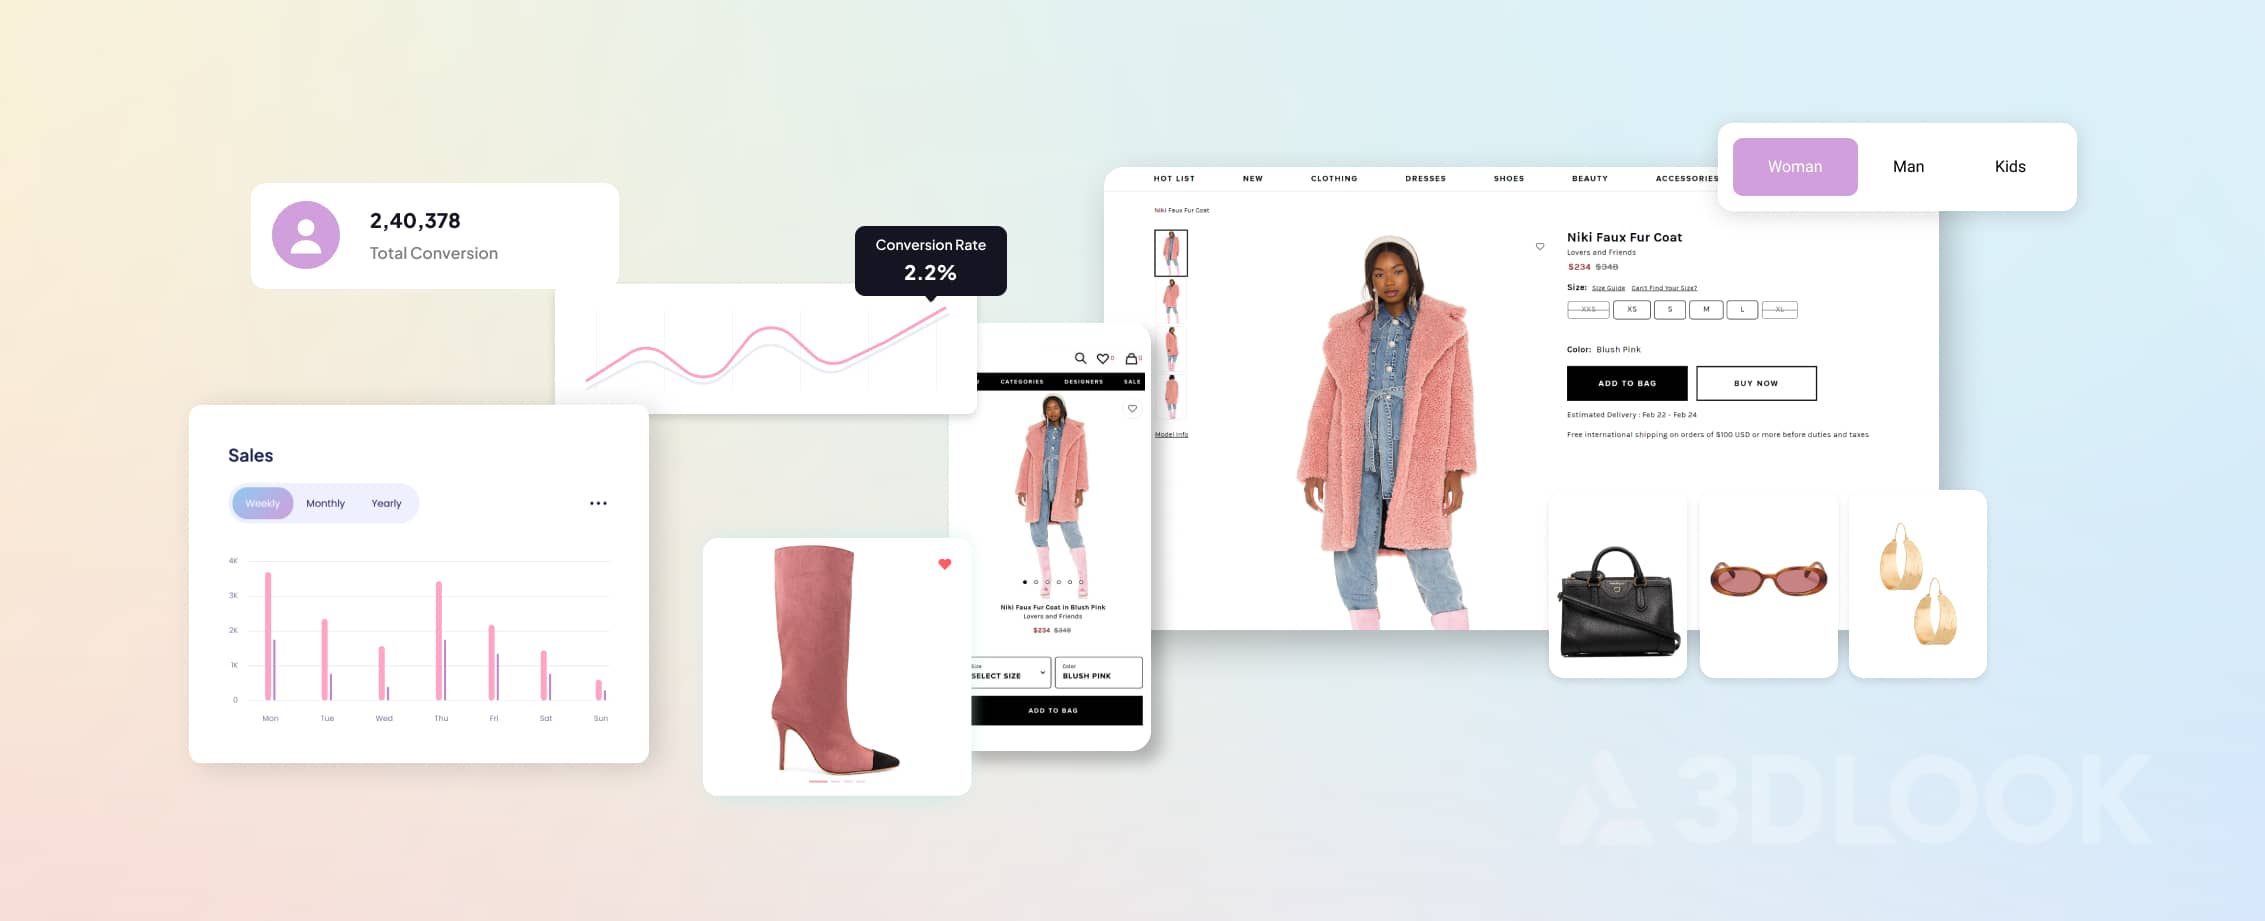 A collection of Fashion eCommerce UI elements on a white background designed to beat high conversion rates.